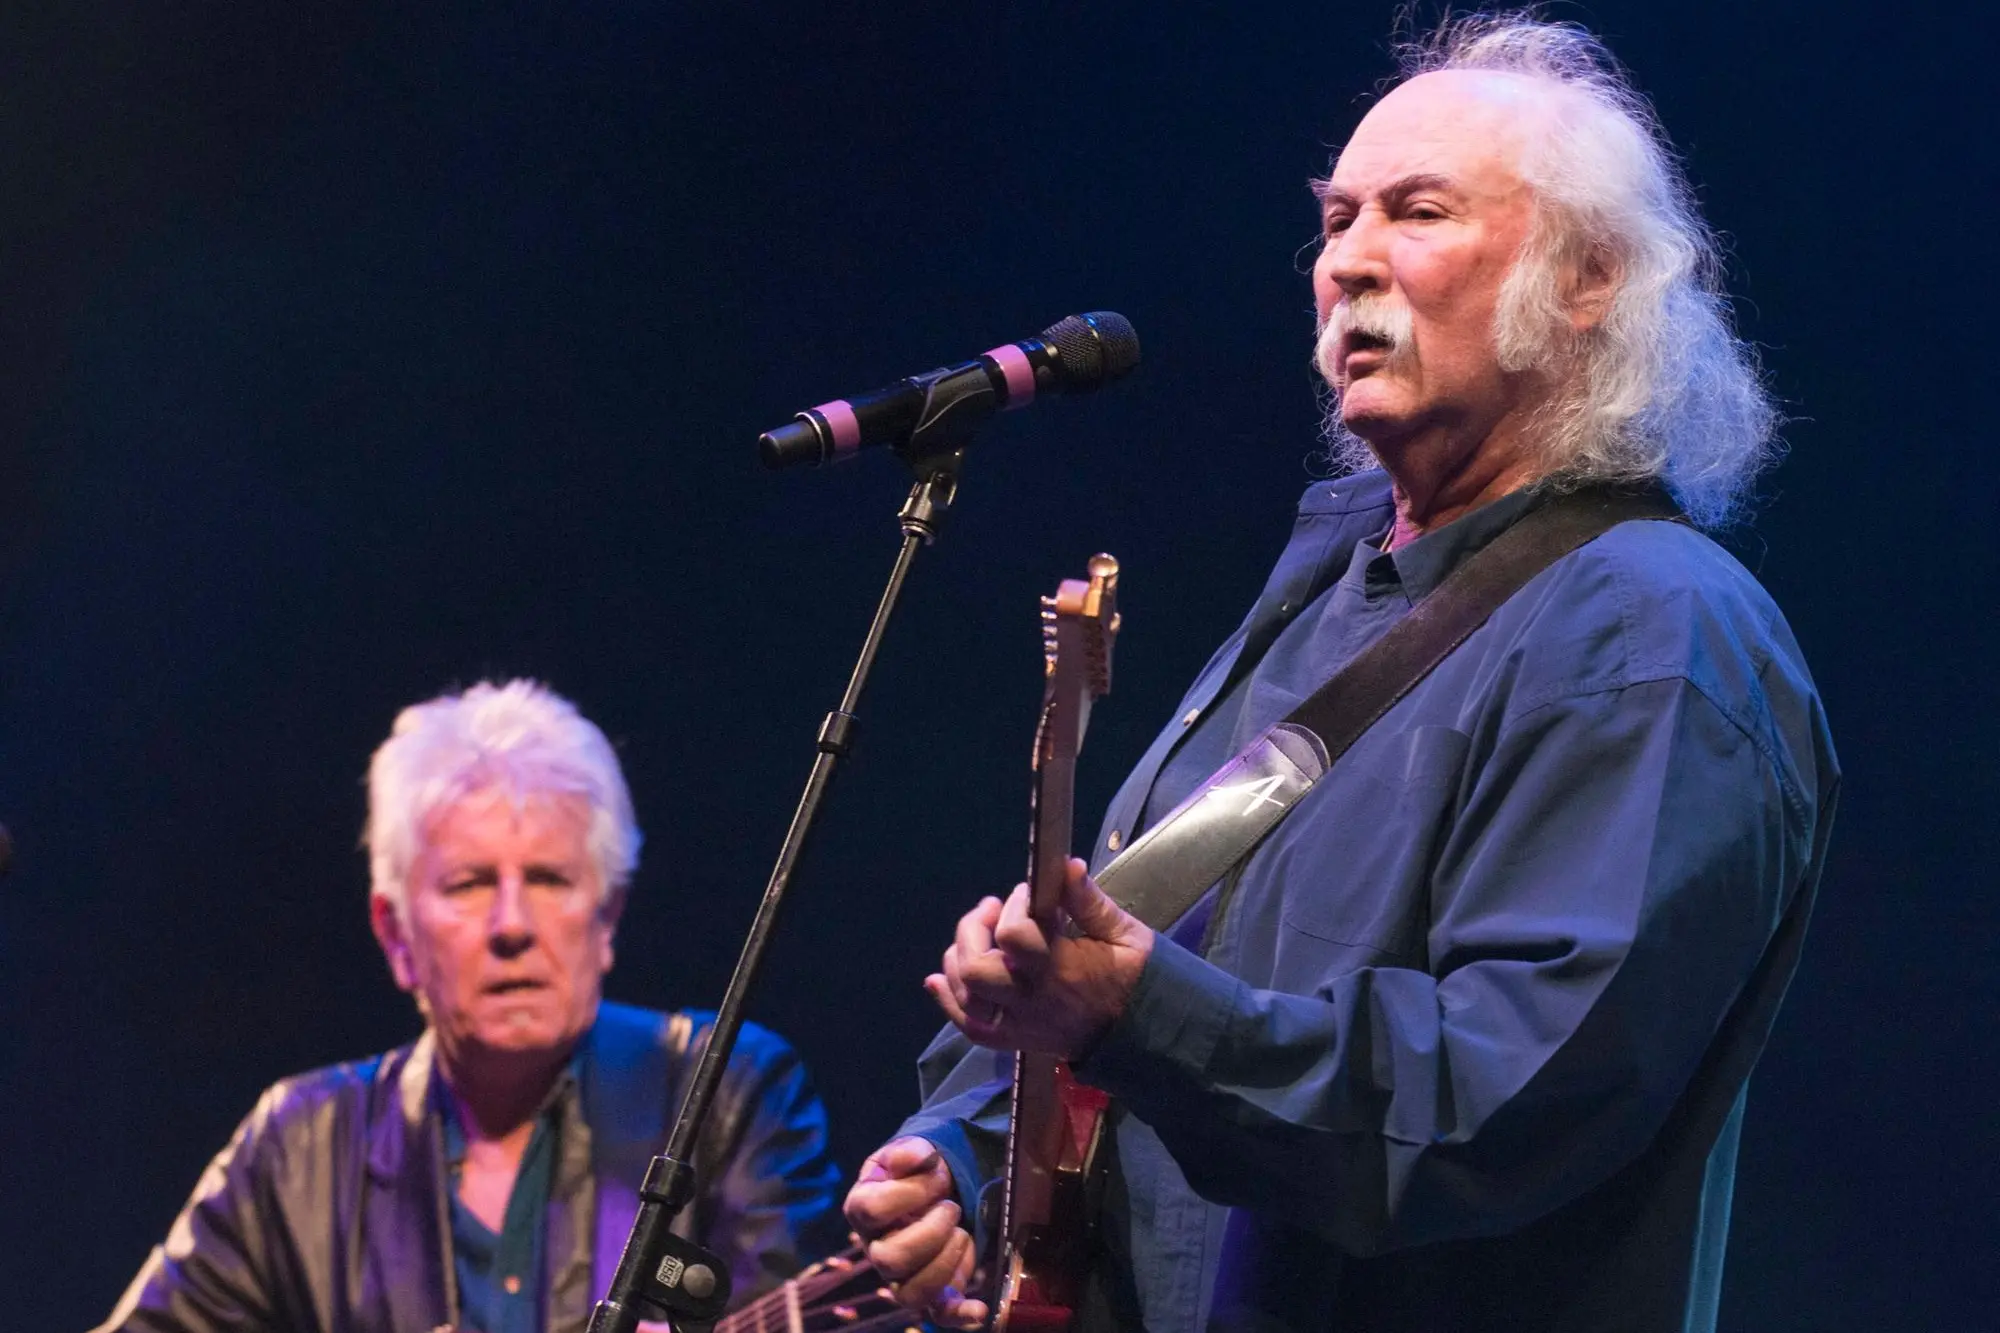 epa10416898 (FILE) - US musicians David Crosby (R) and Graham Nash (L) perform at a benefit concert in Tucson, USA, on 10 March 2011 (reissued 19 January 2023). Crosby, the singer-songwriter who cofounded The Byrds and Crosby, Stills & Nash, has died at the the age of 81 his publicist has confirmed. EPA/GARY WILLIAMS *** Local Caption *** 02627006